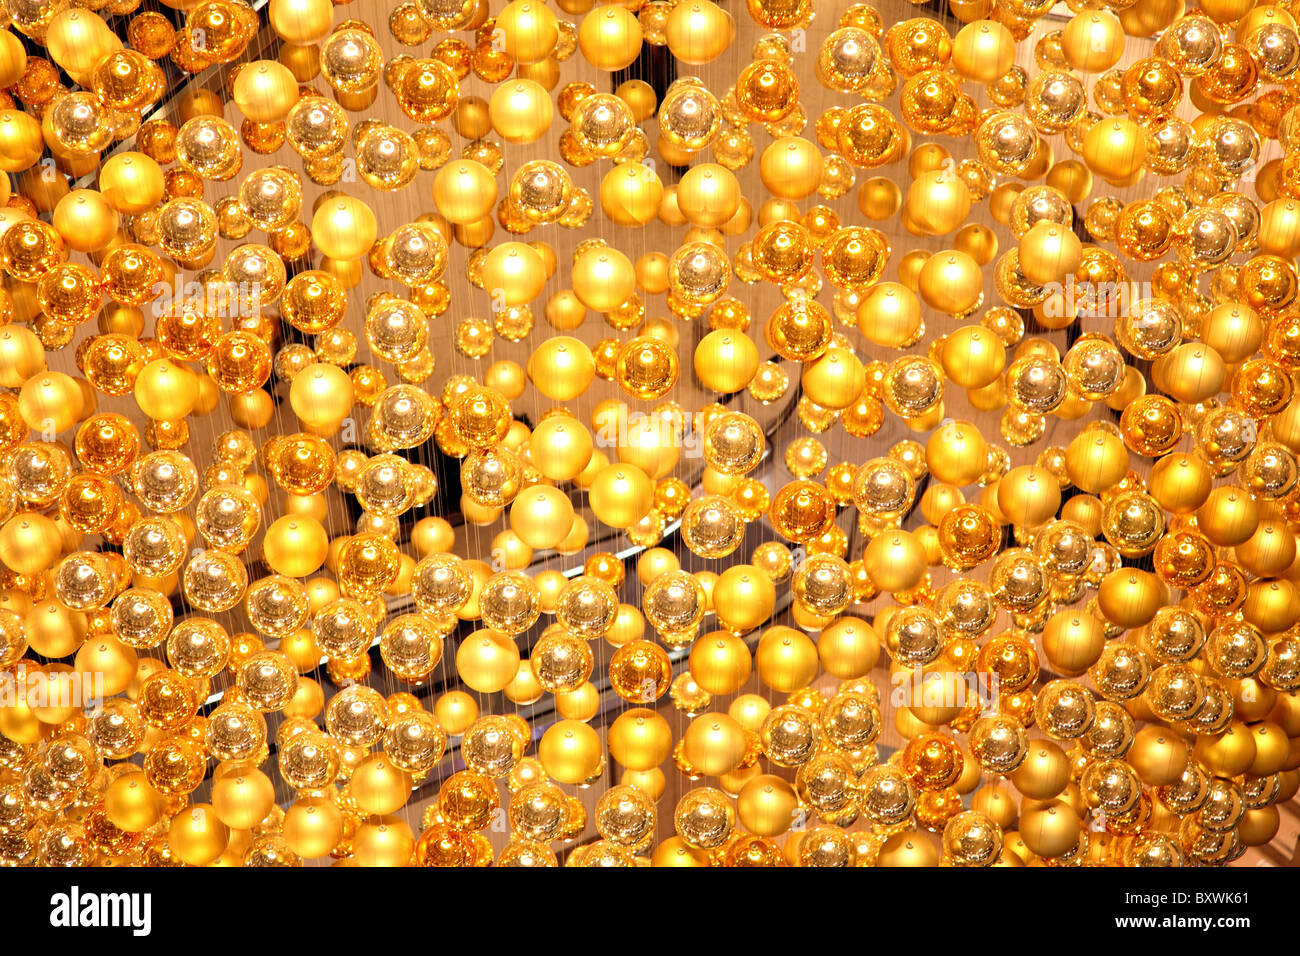 Christmas decoration in a shopping mall.  Many golden Christmas tree balls forms a giant ball. Stock Photo